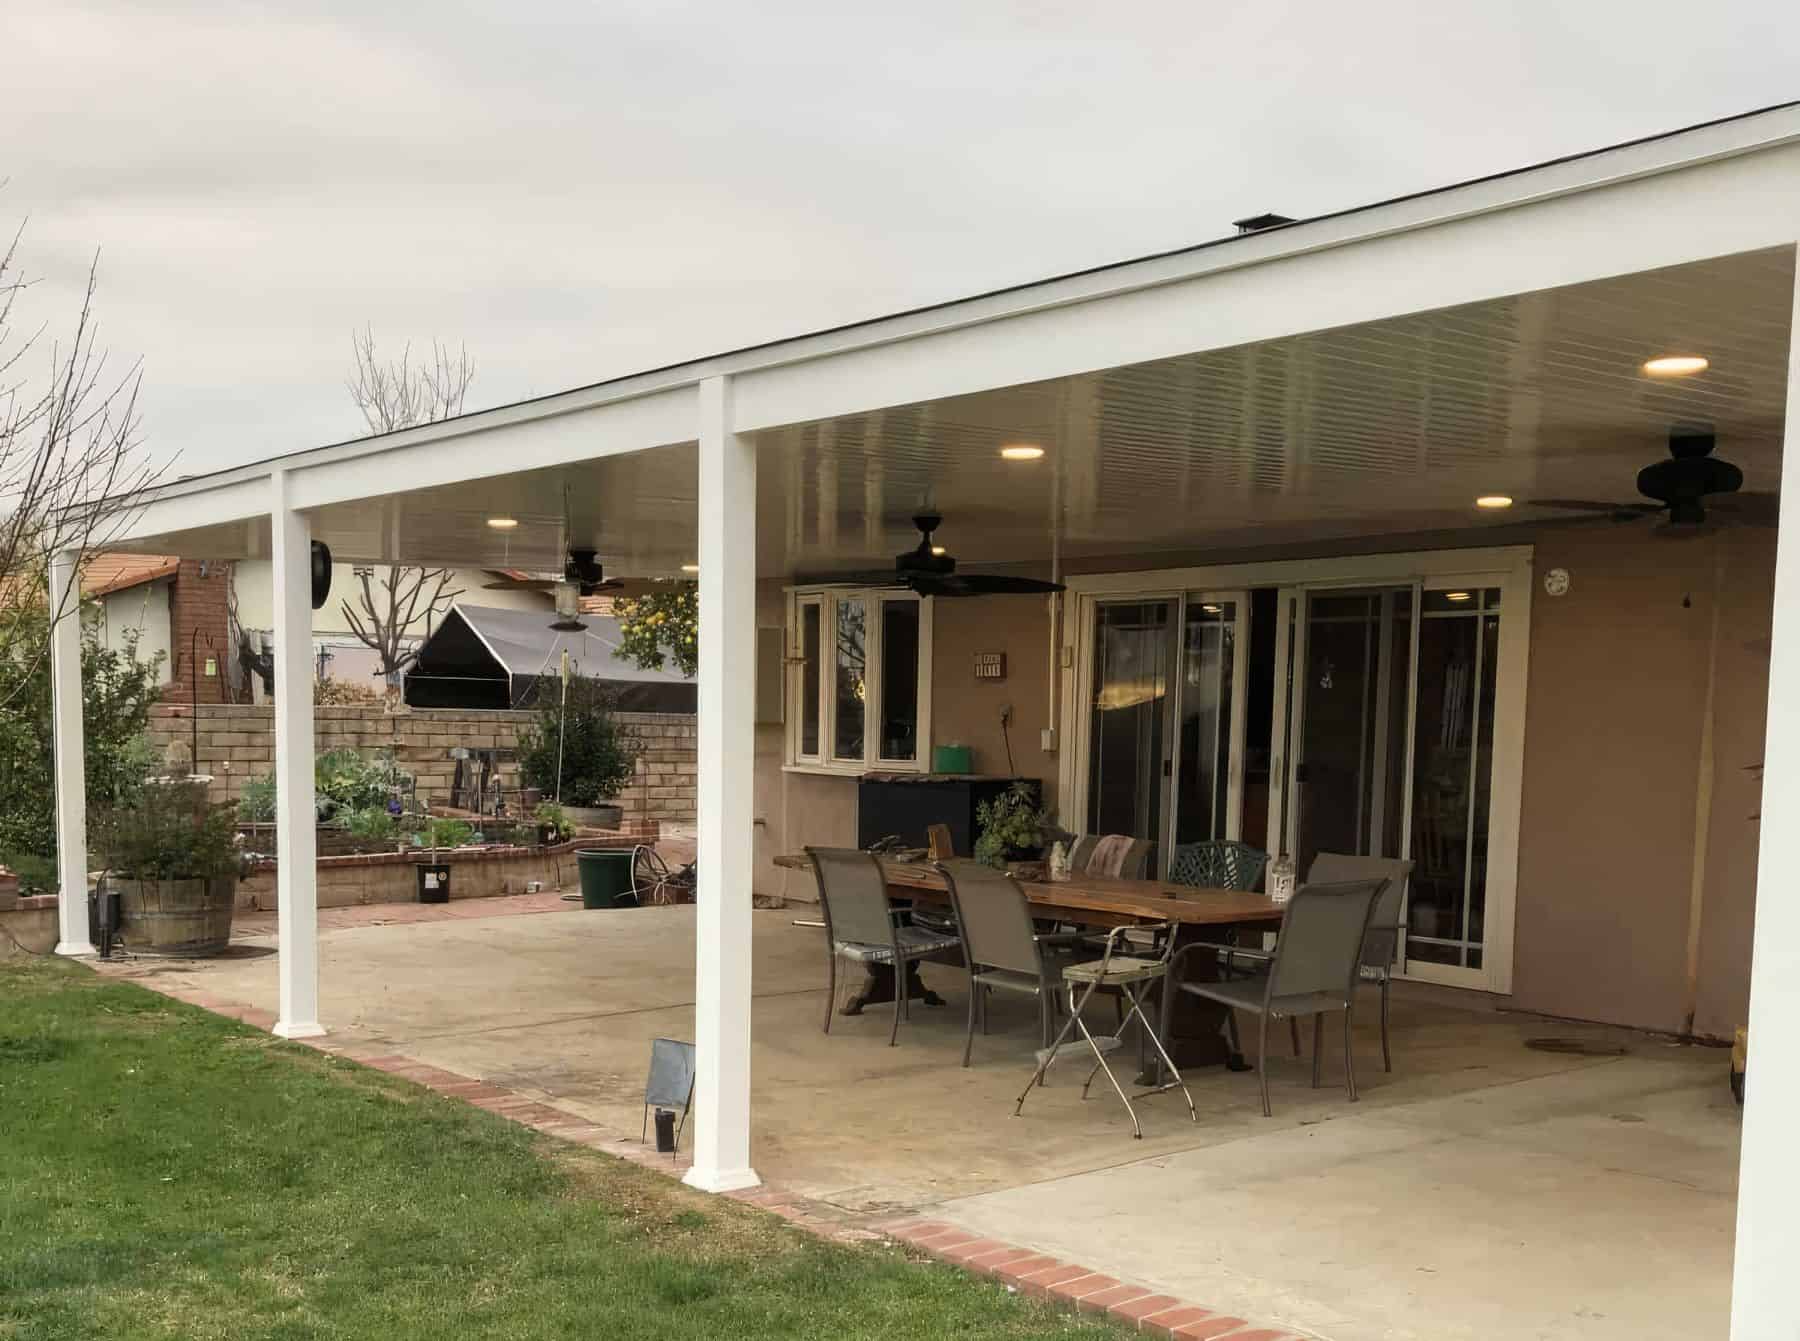 Outdoor vinyl patio awning, concrete floor, glass windows, ceiling fans, and outdoor tables.